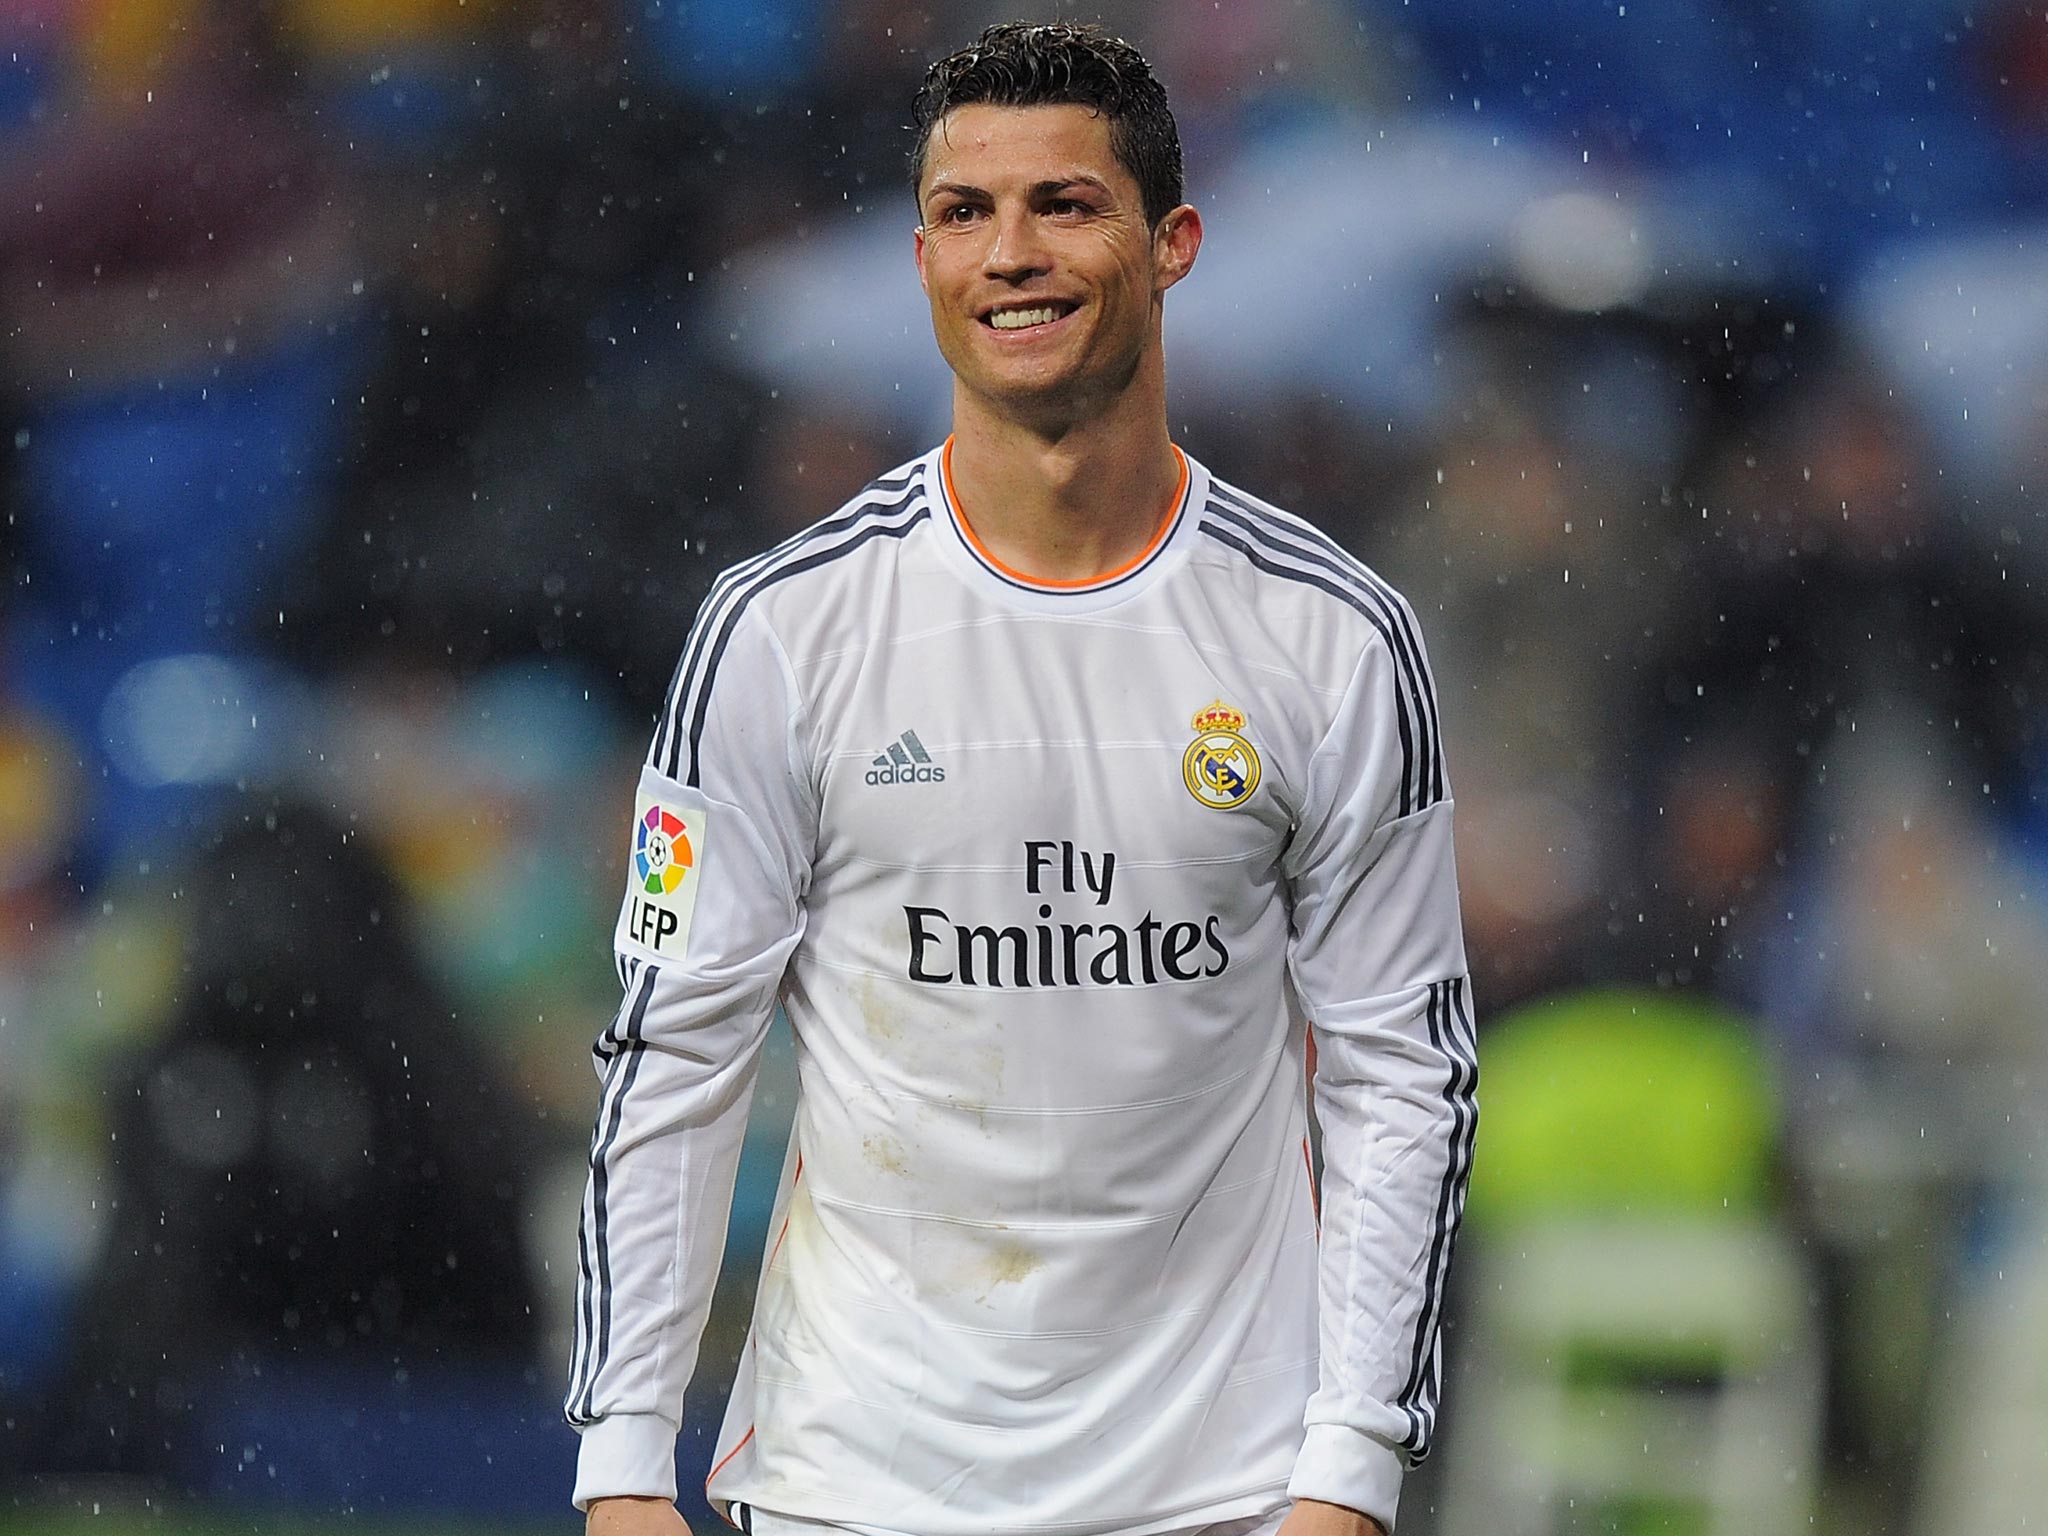 ronaldo wallpaper download,player,football player,facial expression,soccer player,product